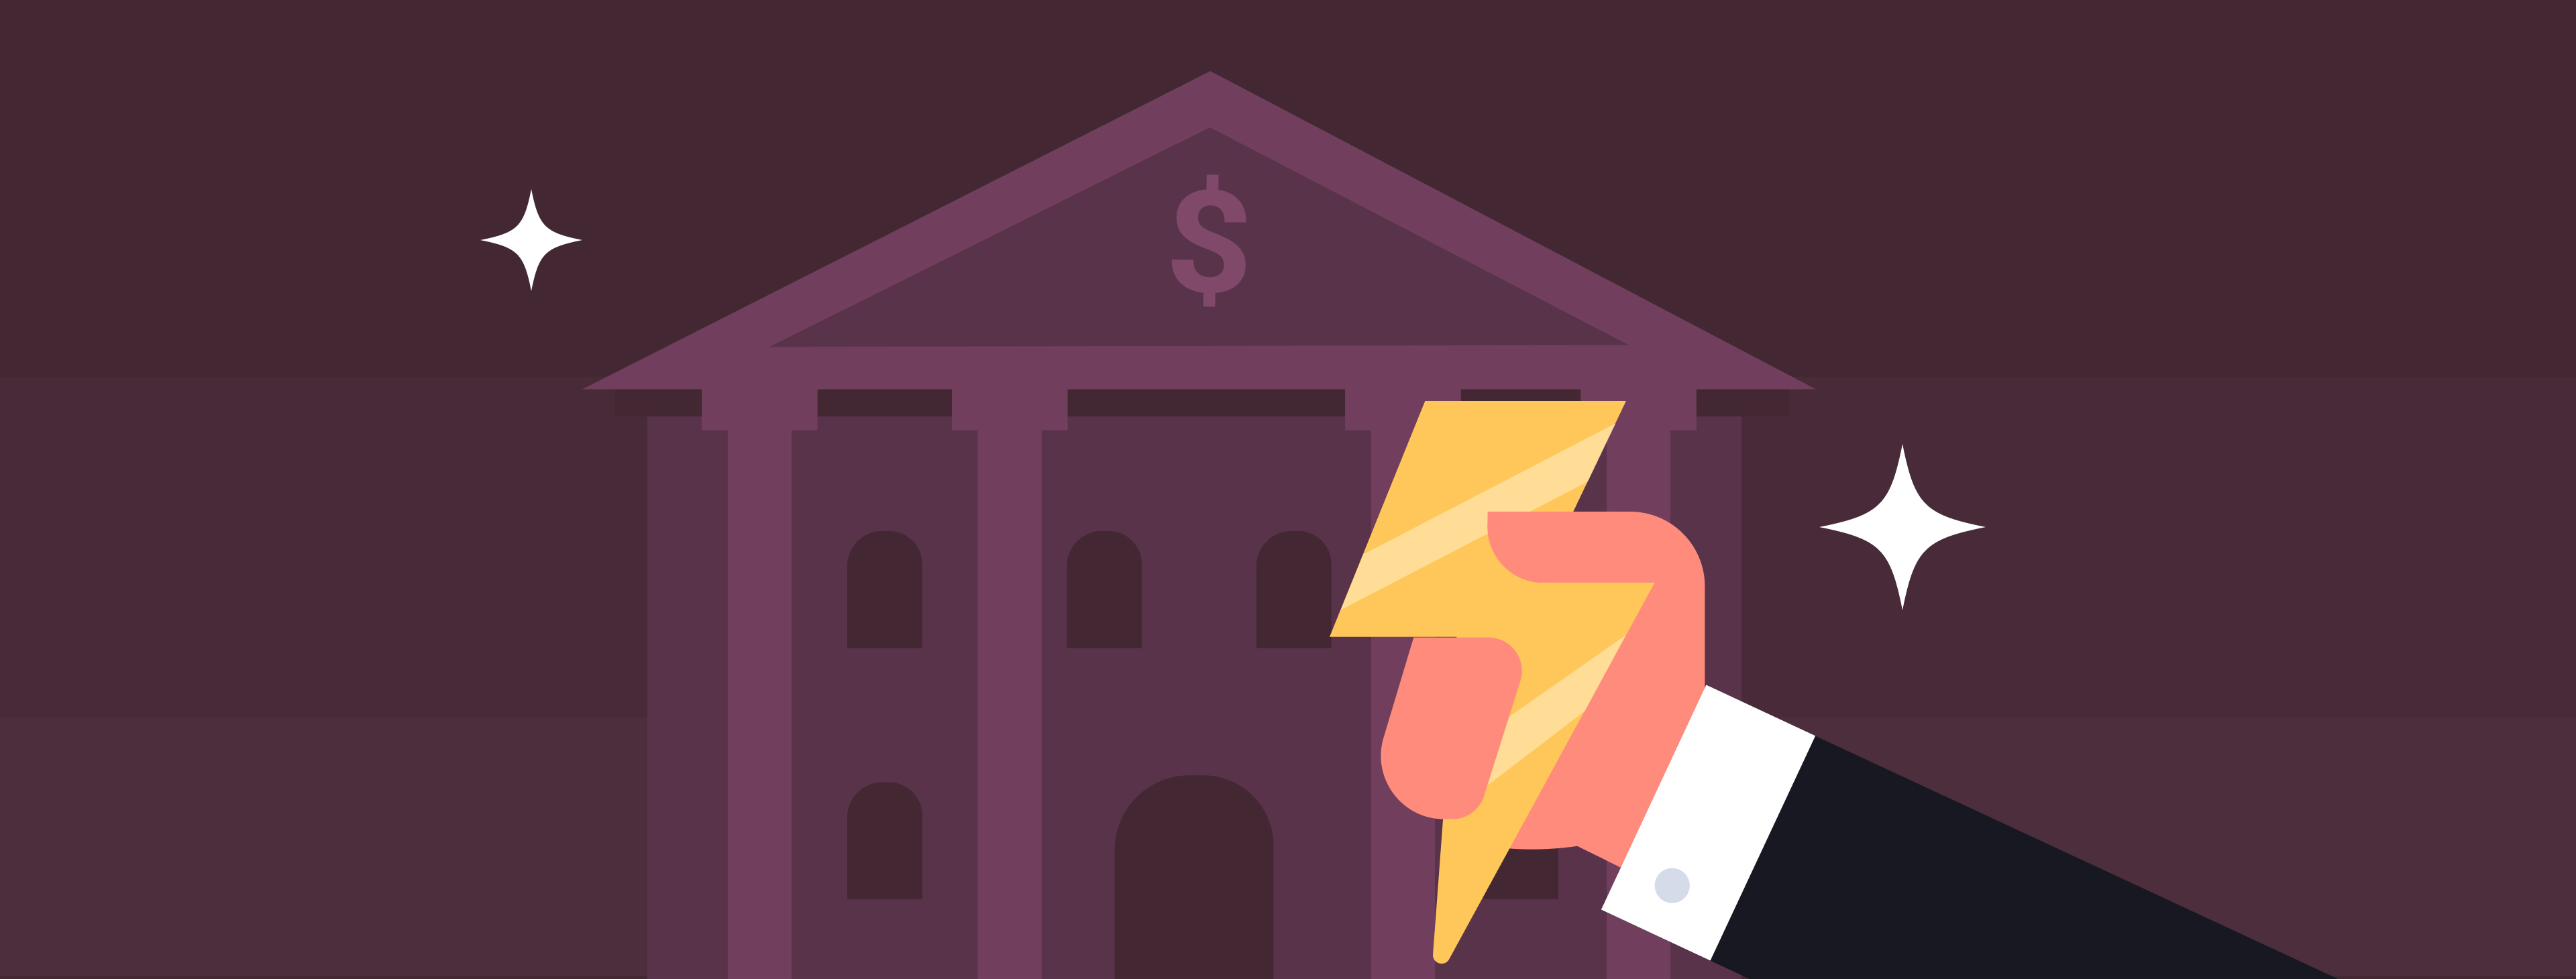 How Can Banks Supercharge Their Lending Systems?